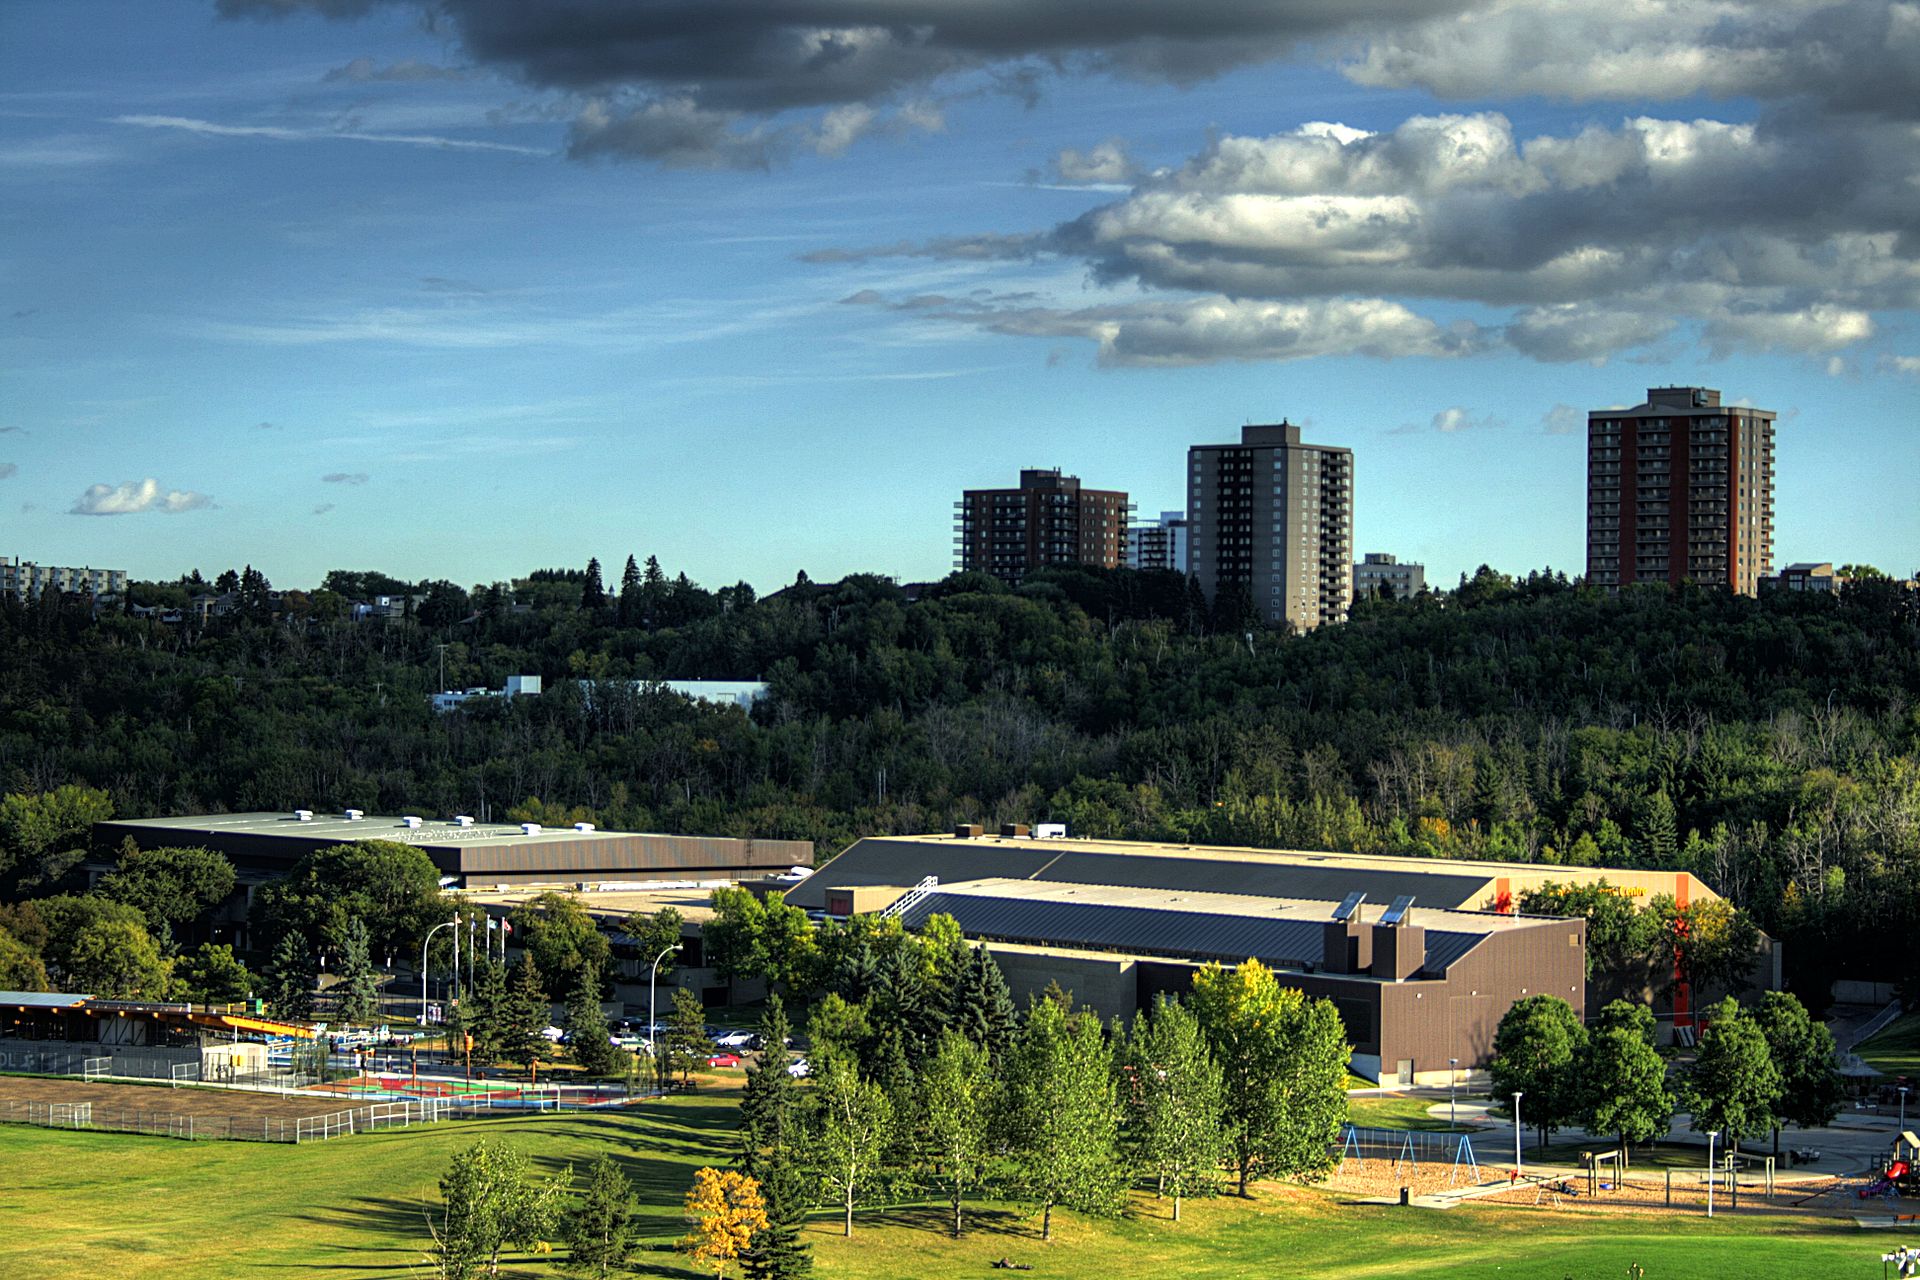 The Kinsmen Sports Centre is one of the proposed venues for the Commonwealth Games should Edmonton 2022 win the bid ©Wikipedia